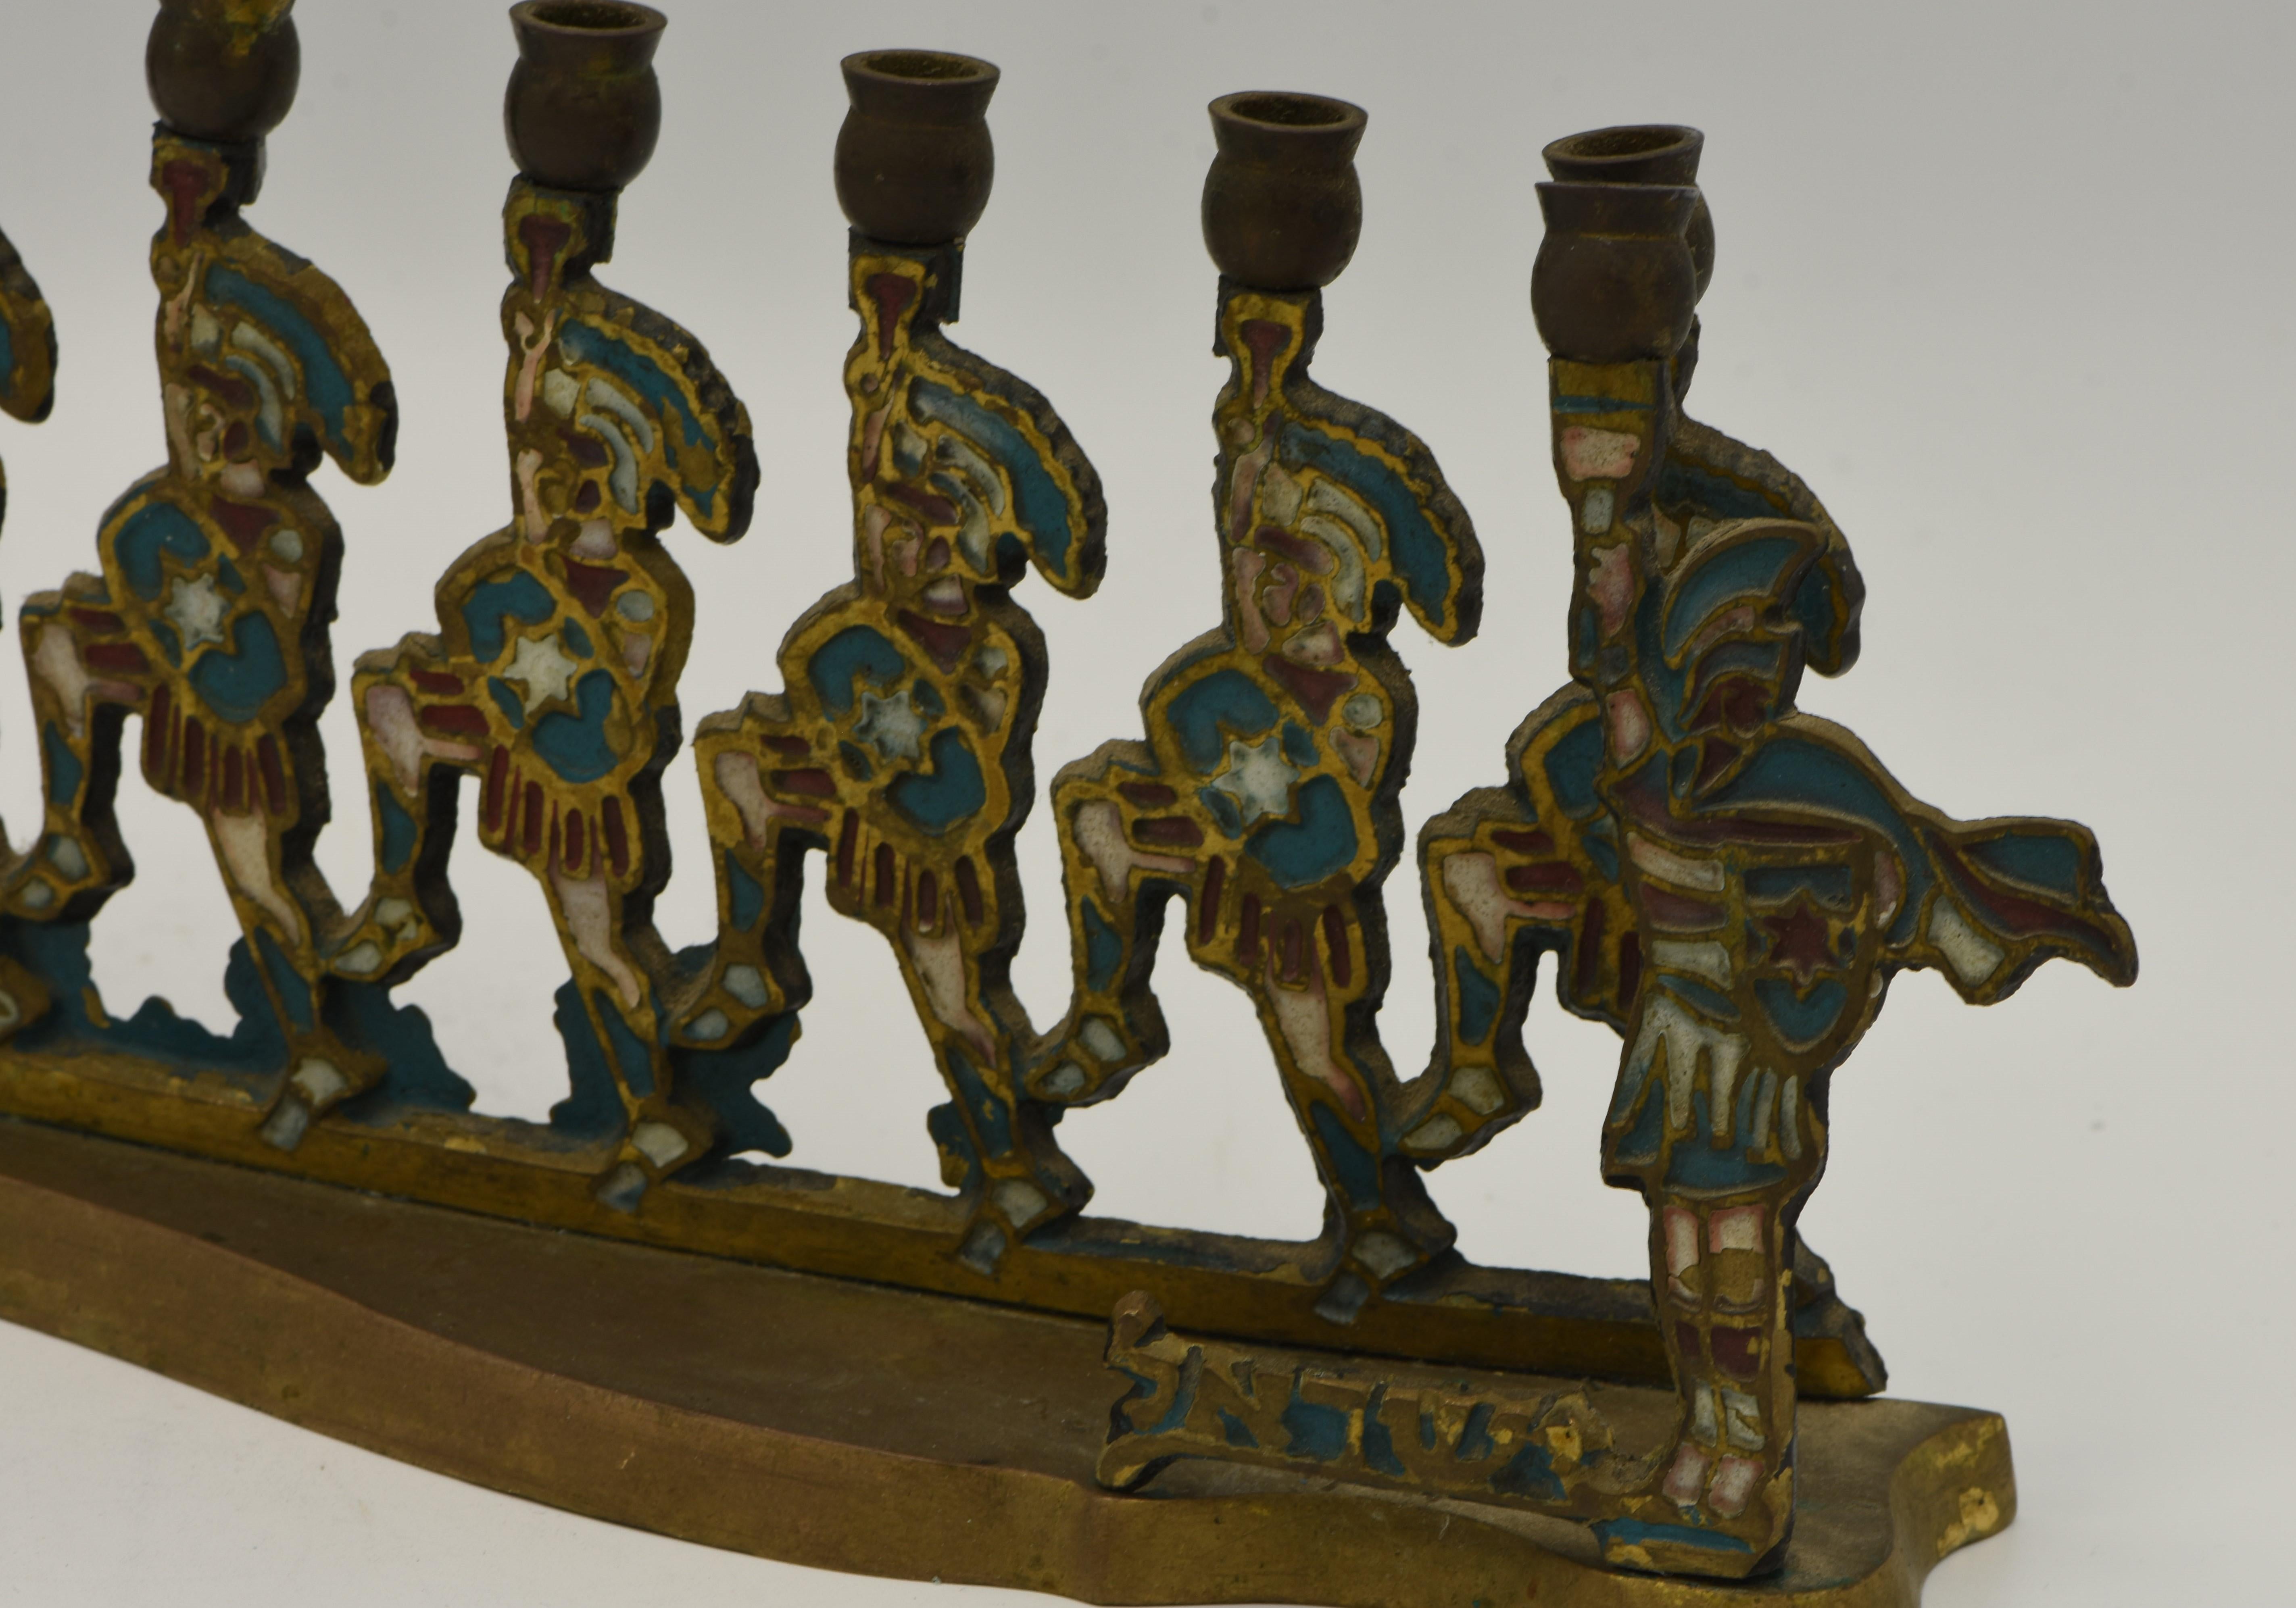 Cast enameled brass Hanukkah Lamp Menorah, Israel, circa 1950.
In a form of nine Maccabees holding the candles, the Servant light (Shamash) with the Hebrew word 